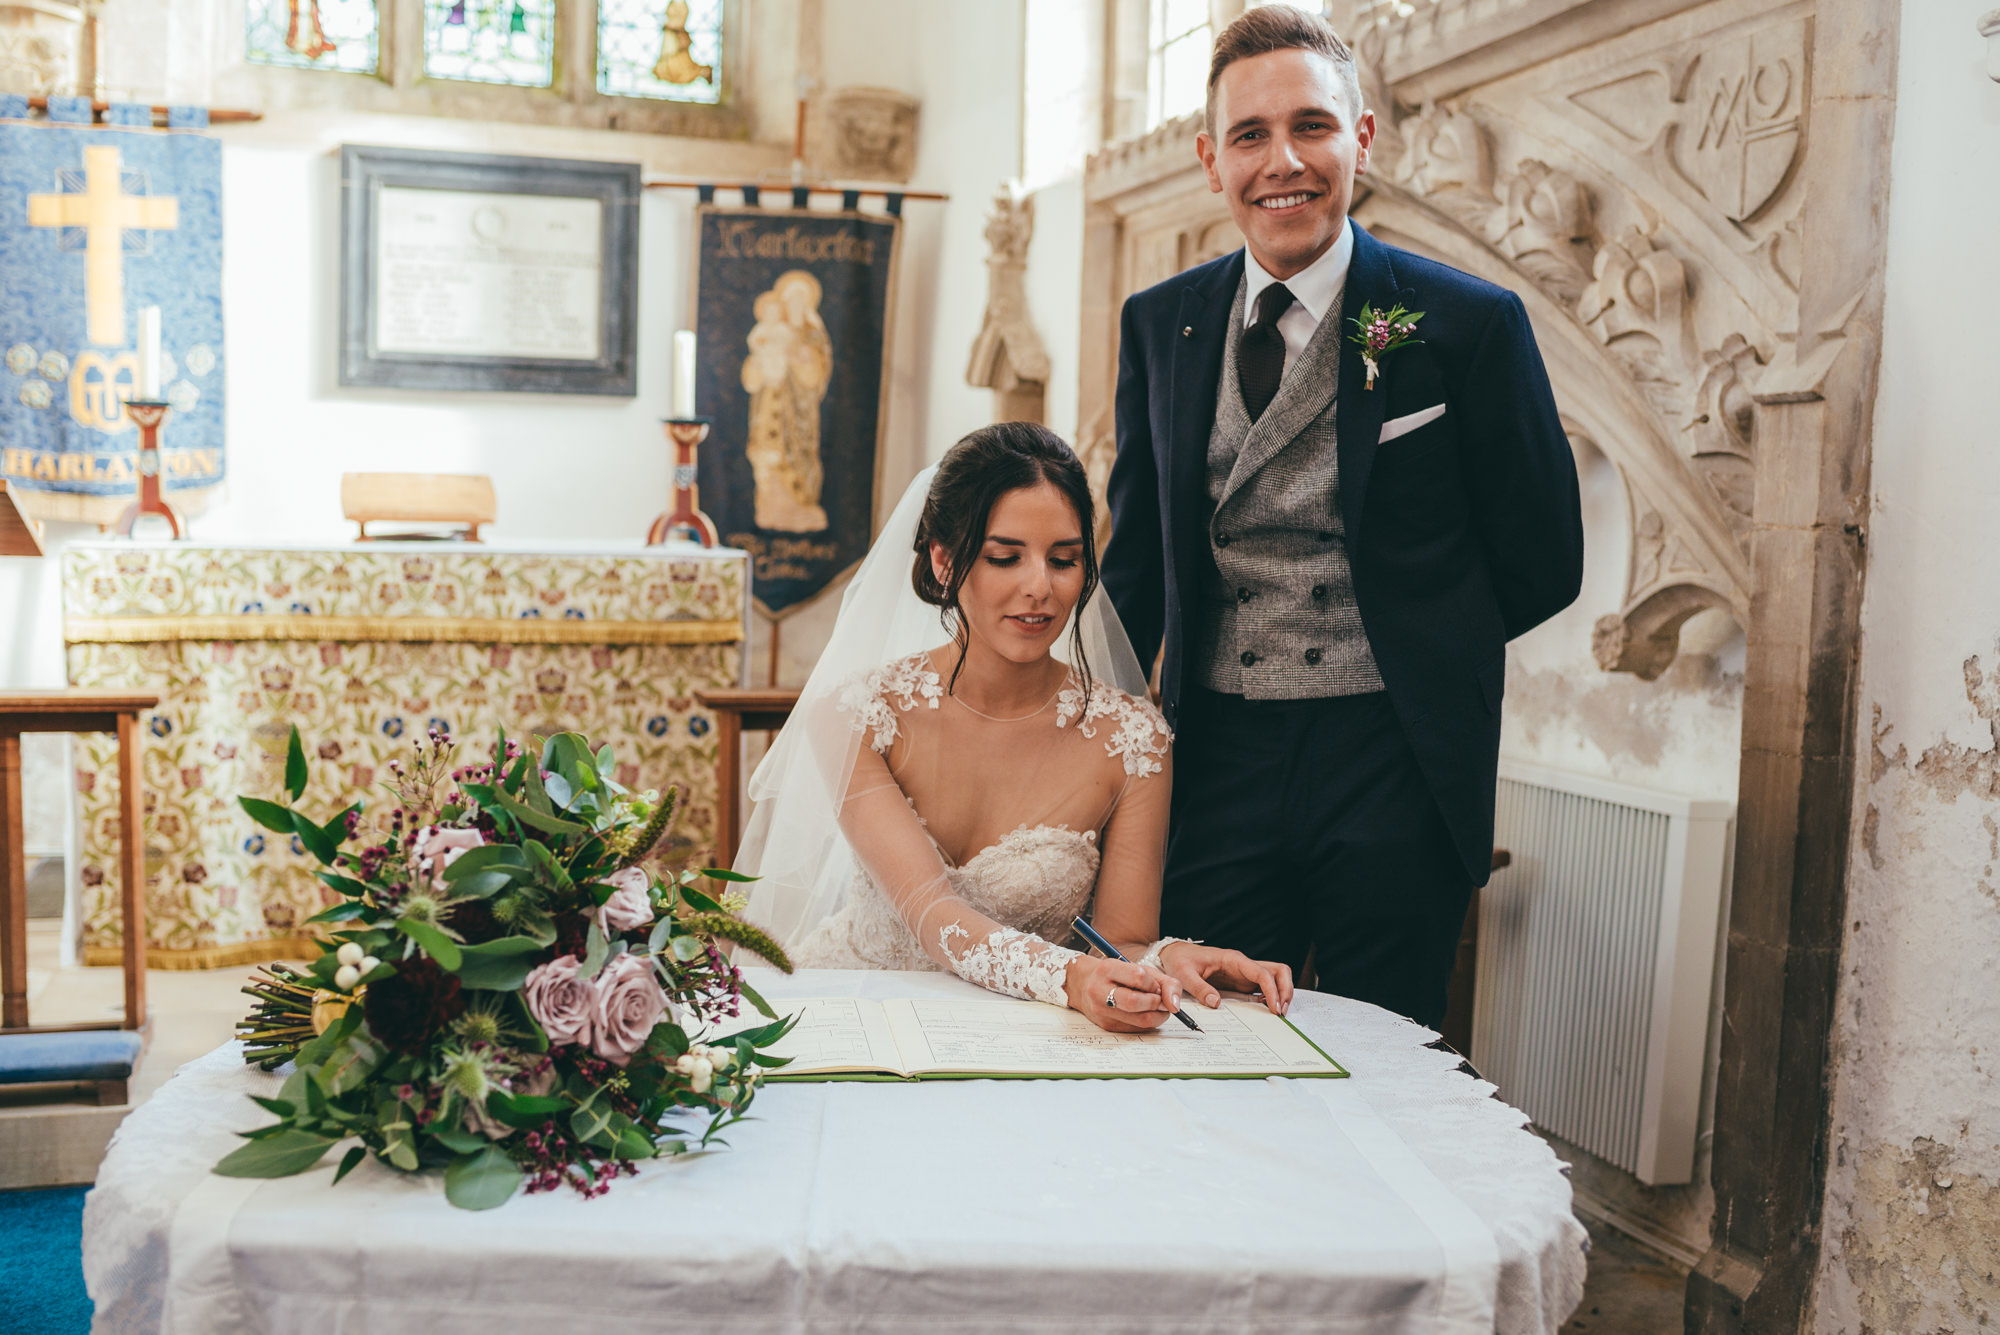 photograph of the bride and groom signing the wedding register